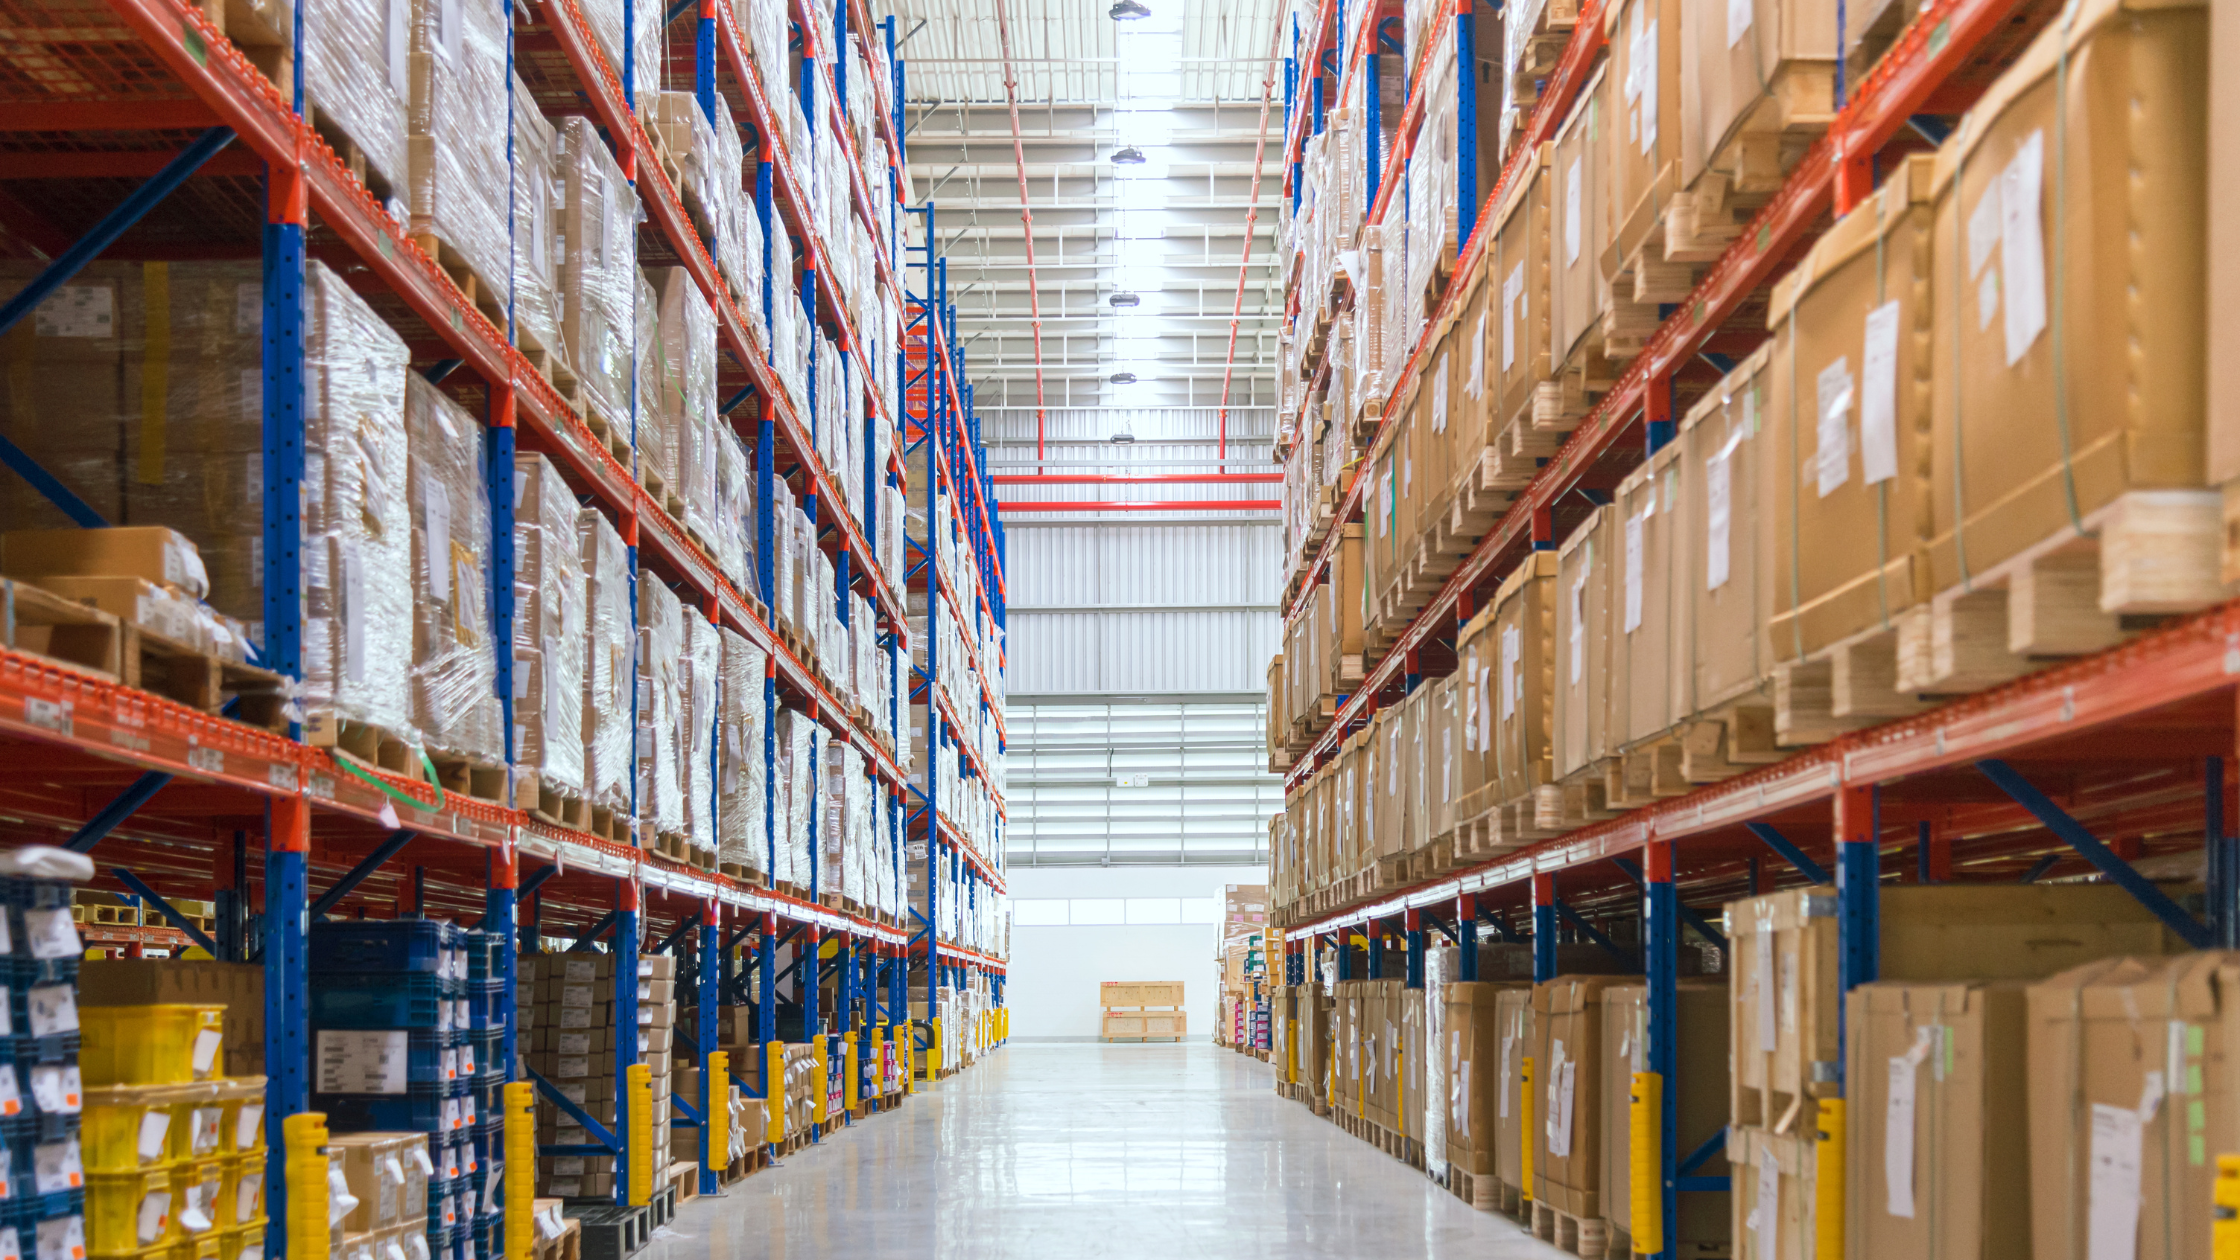 The Essential Guide to Implementing SMI Warehousing in Your Business